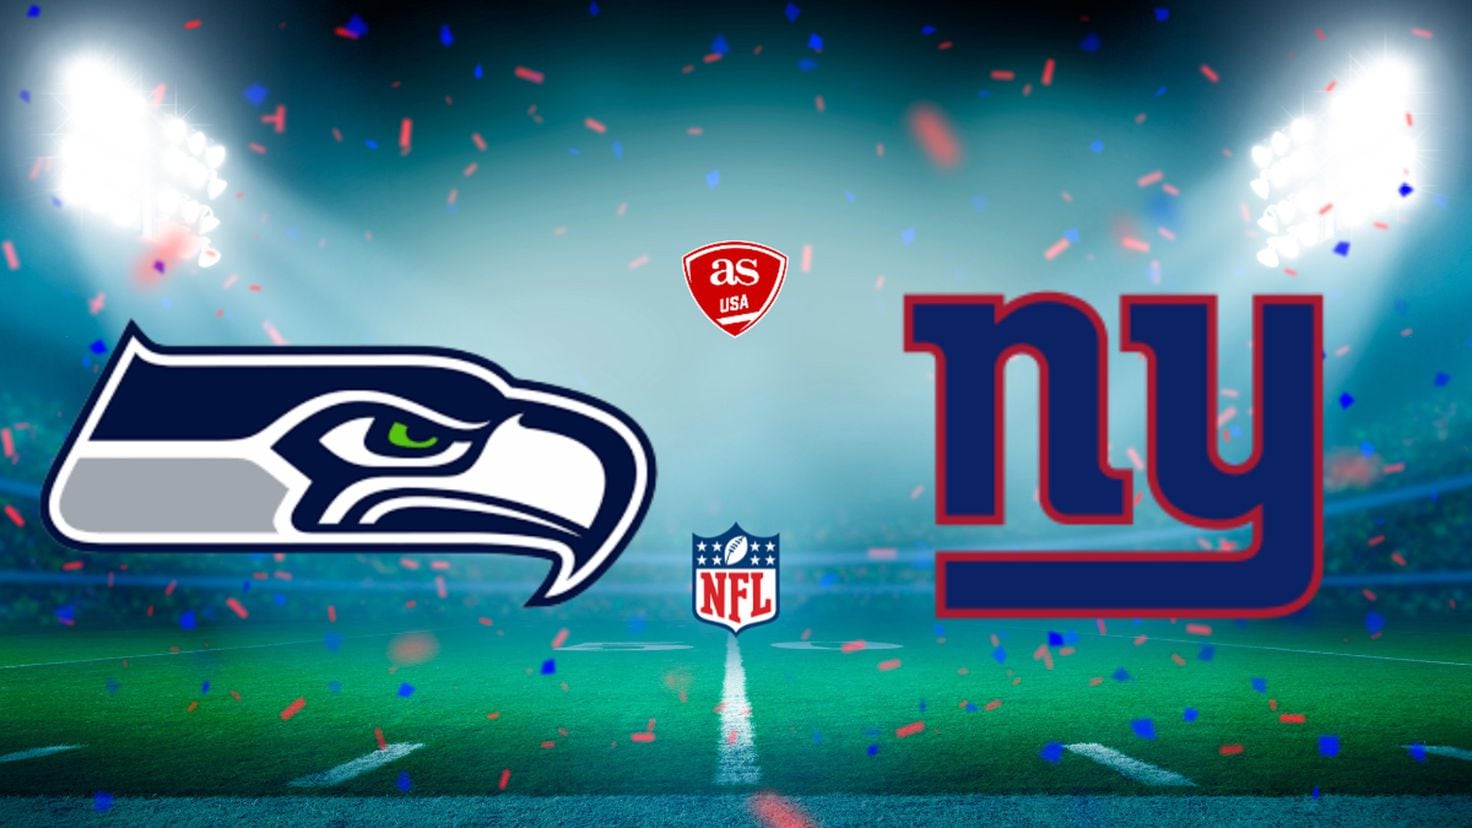 Seattle Seahawks vs New York Giants times, how to watch on TV and